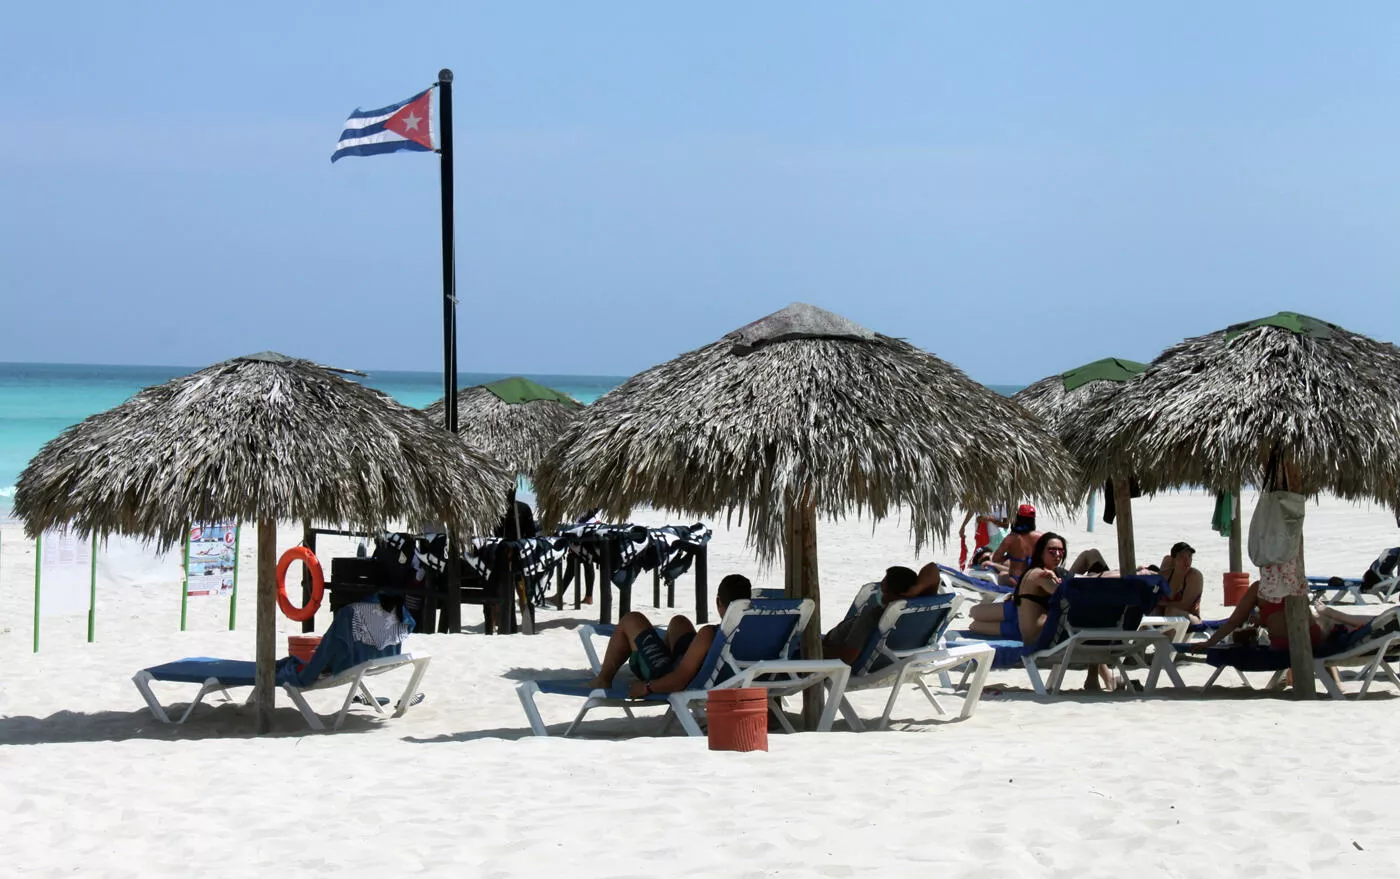 Cuba ready to receive 200 thousand Russian tourists this year